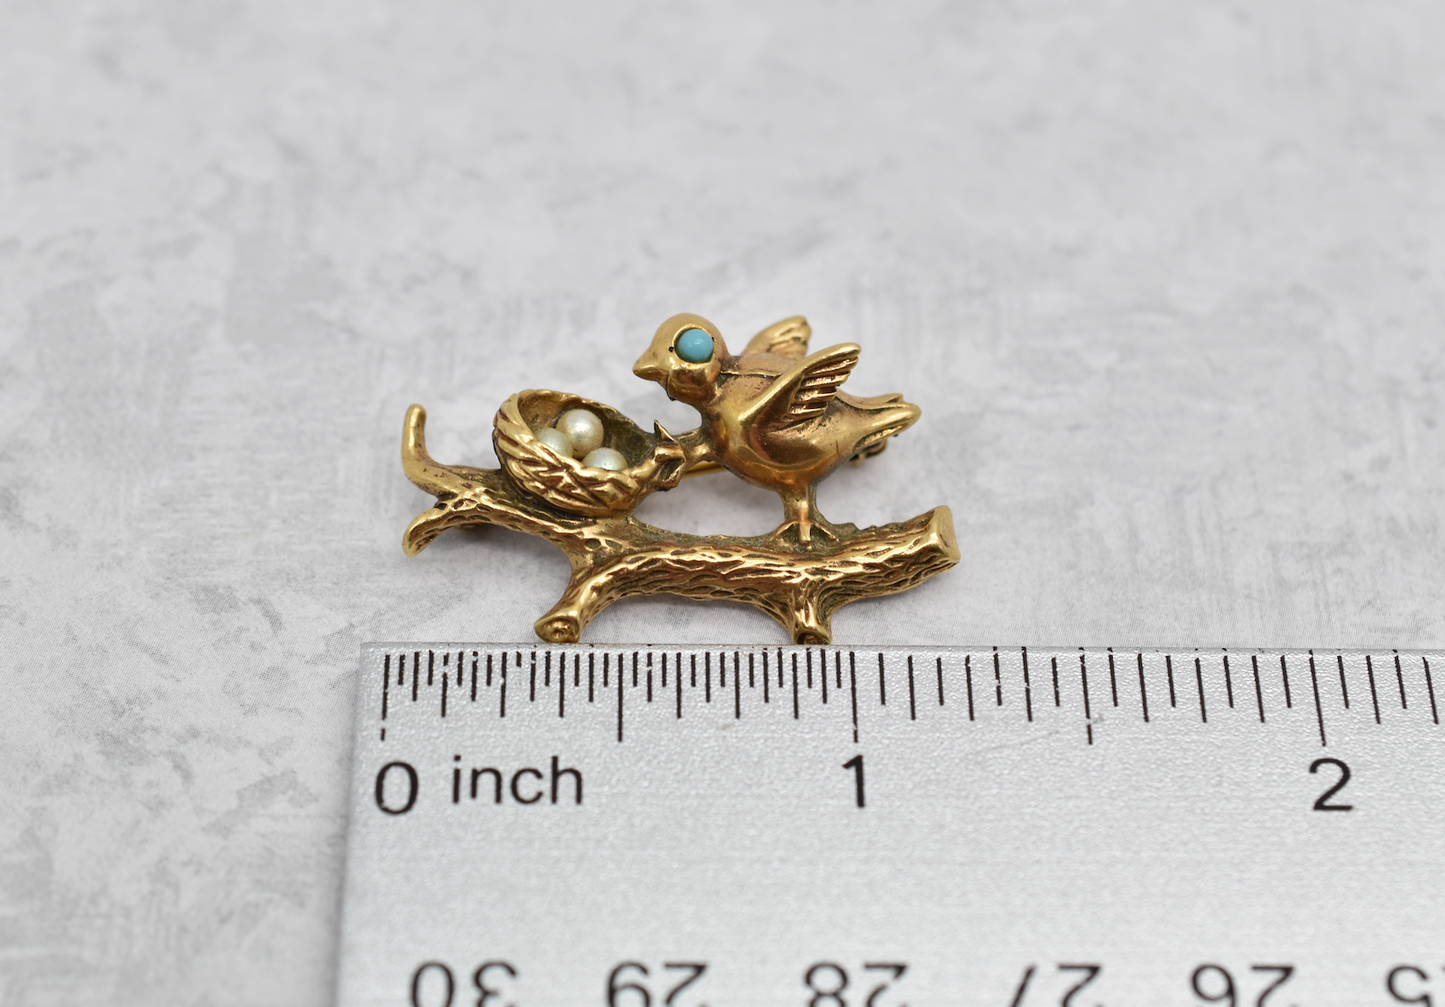 14k Yellow Gold Bird Pin with Turquoise & Pearls - 7.4g